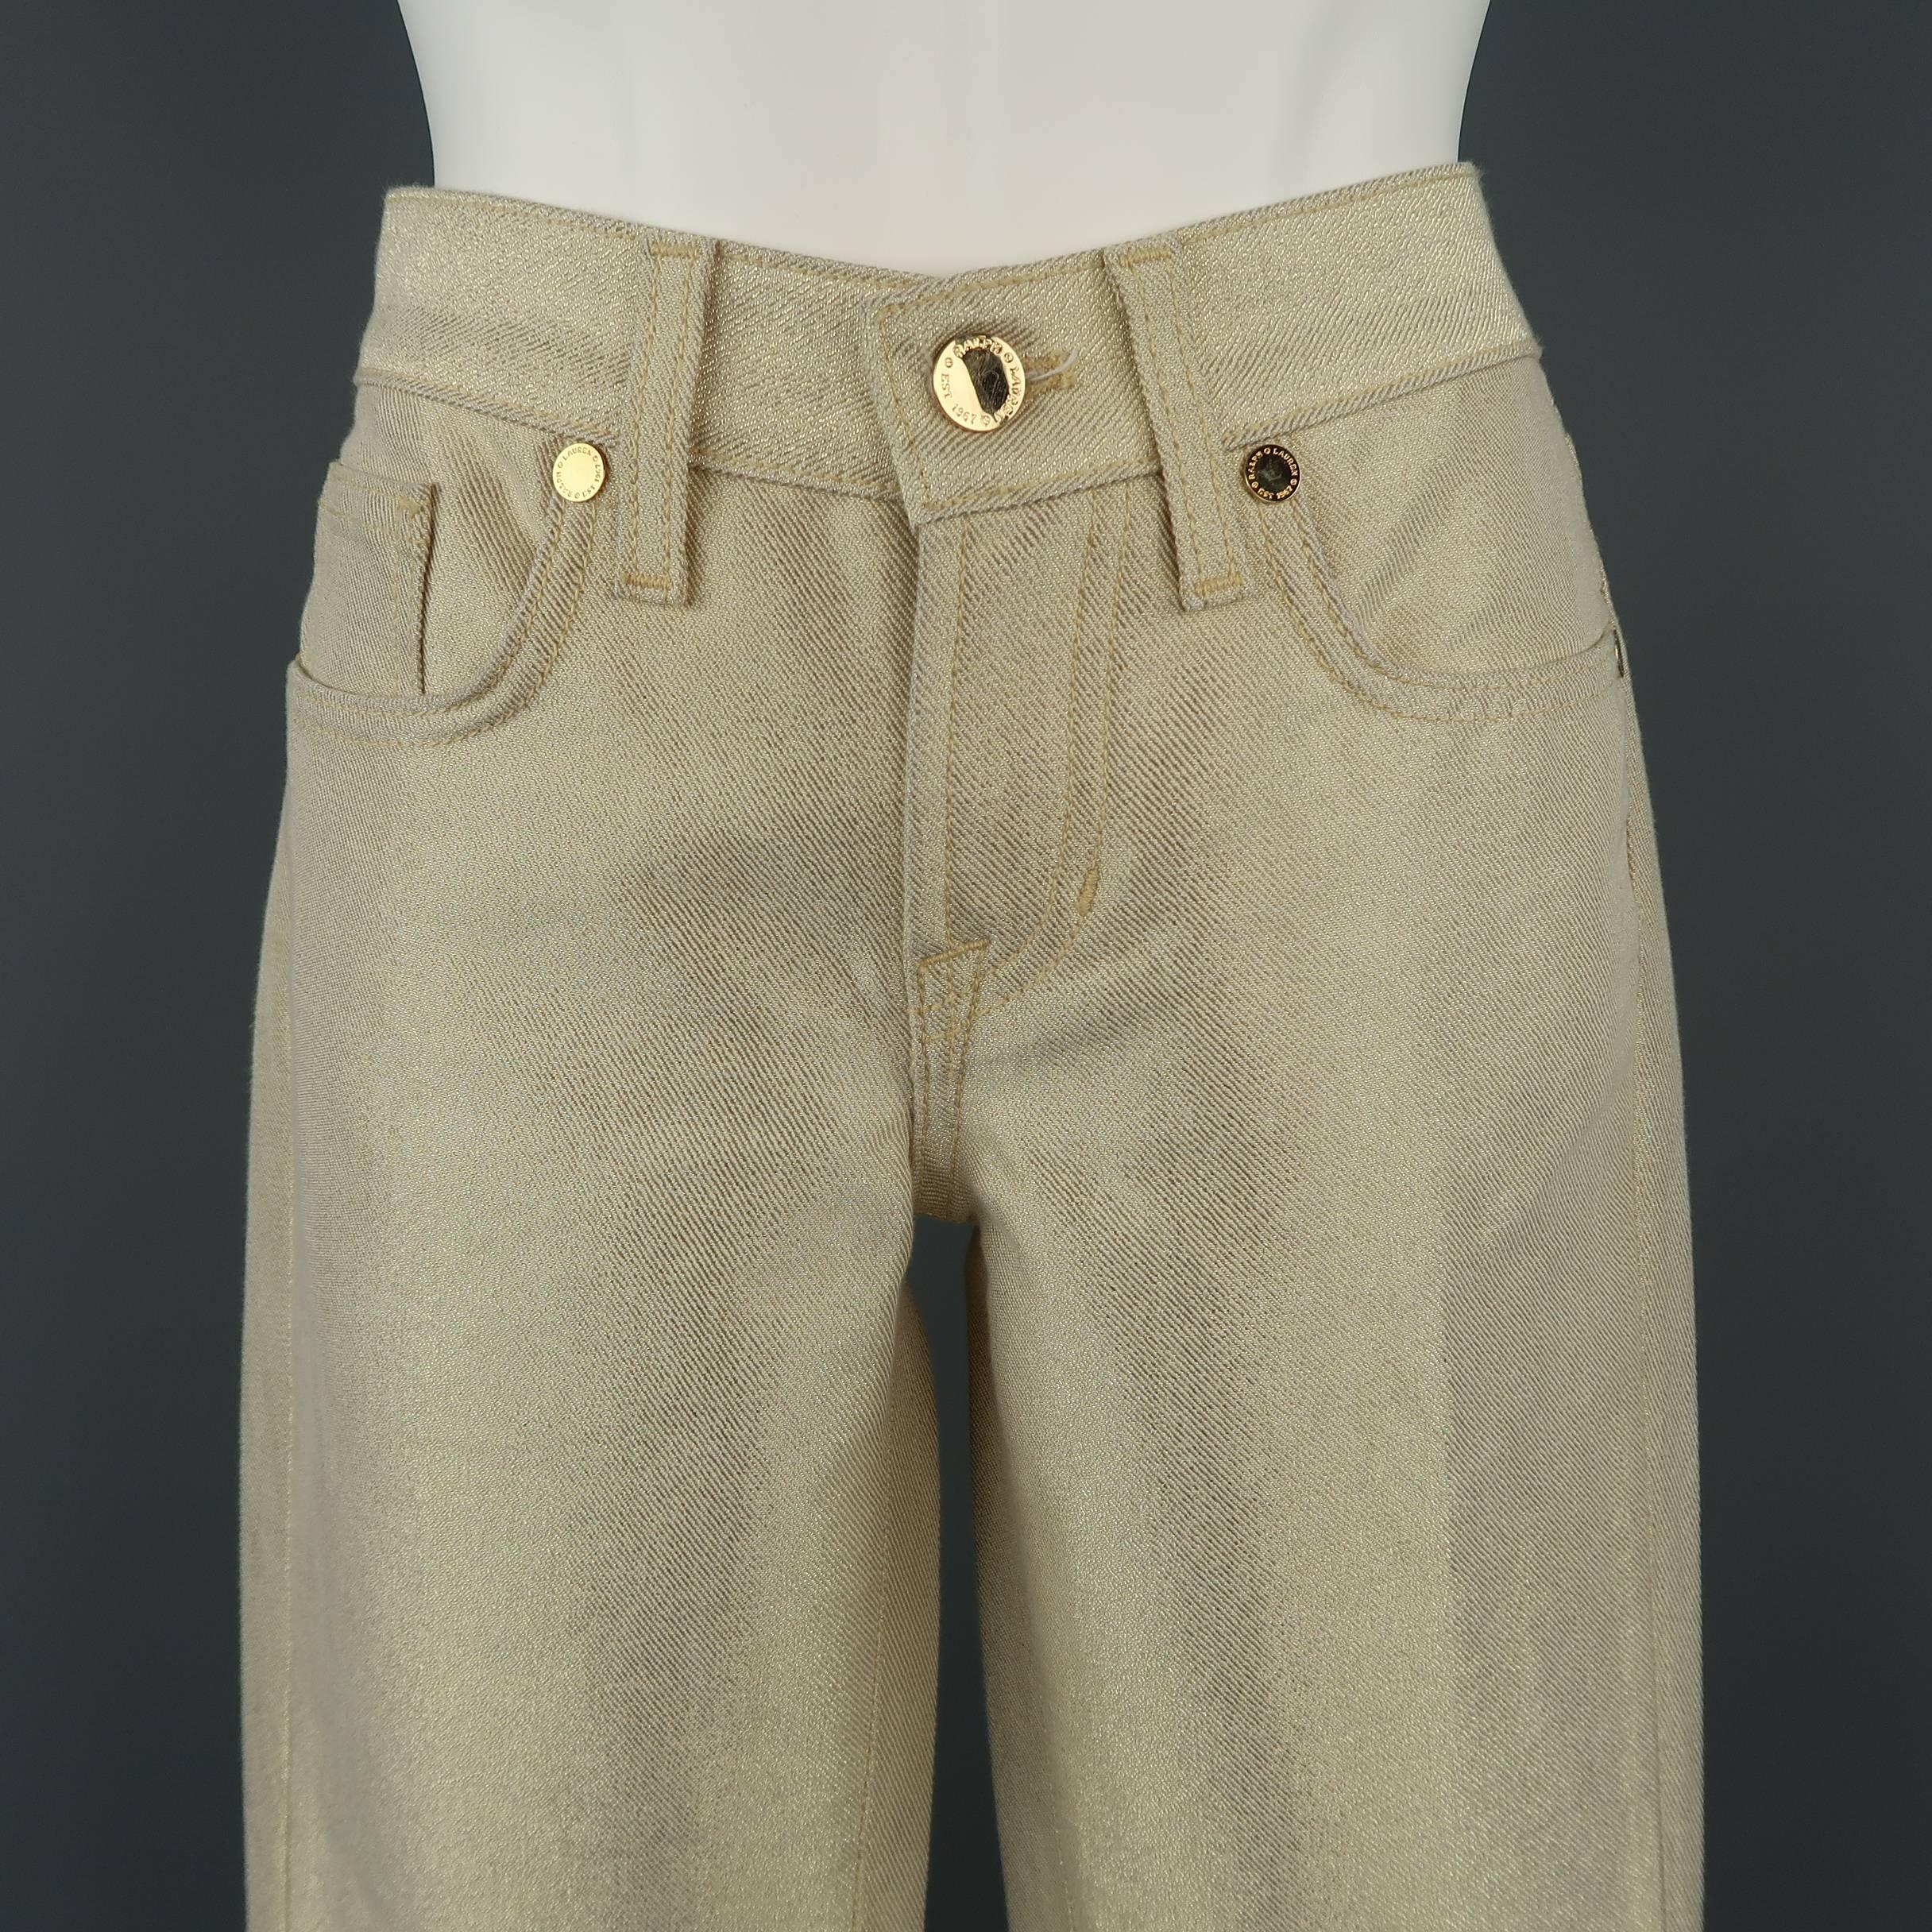 RALPH LAUREN Black Label jeans come in metallic gold cotton denim twill with a gold tone metal plaque in the 380 fit. Made in USA.
 
Excellent Pre-Owned Condition.
Marked:
 
Measurements:
 
Waist: 30 in.
Rise: 7.5 in.
Inseam:  29 in.
